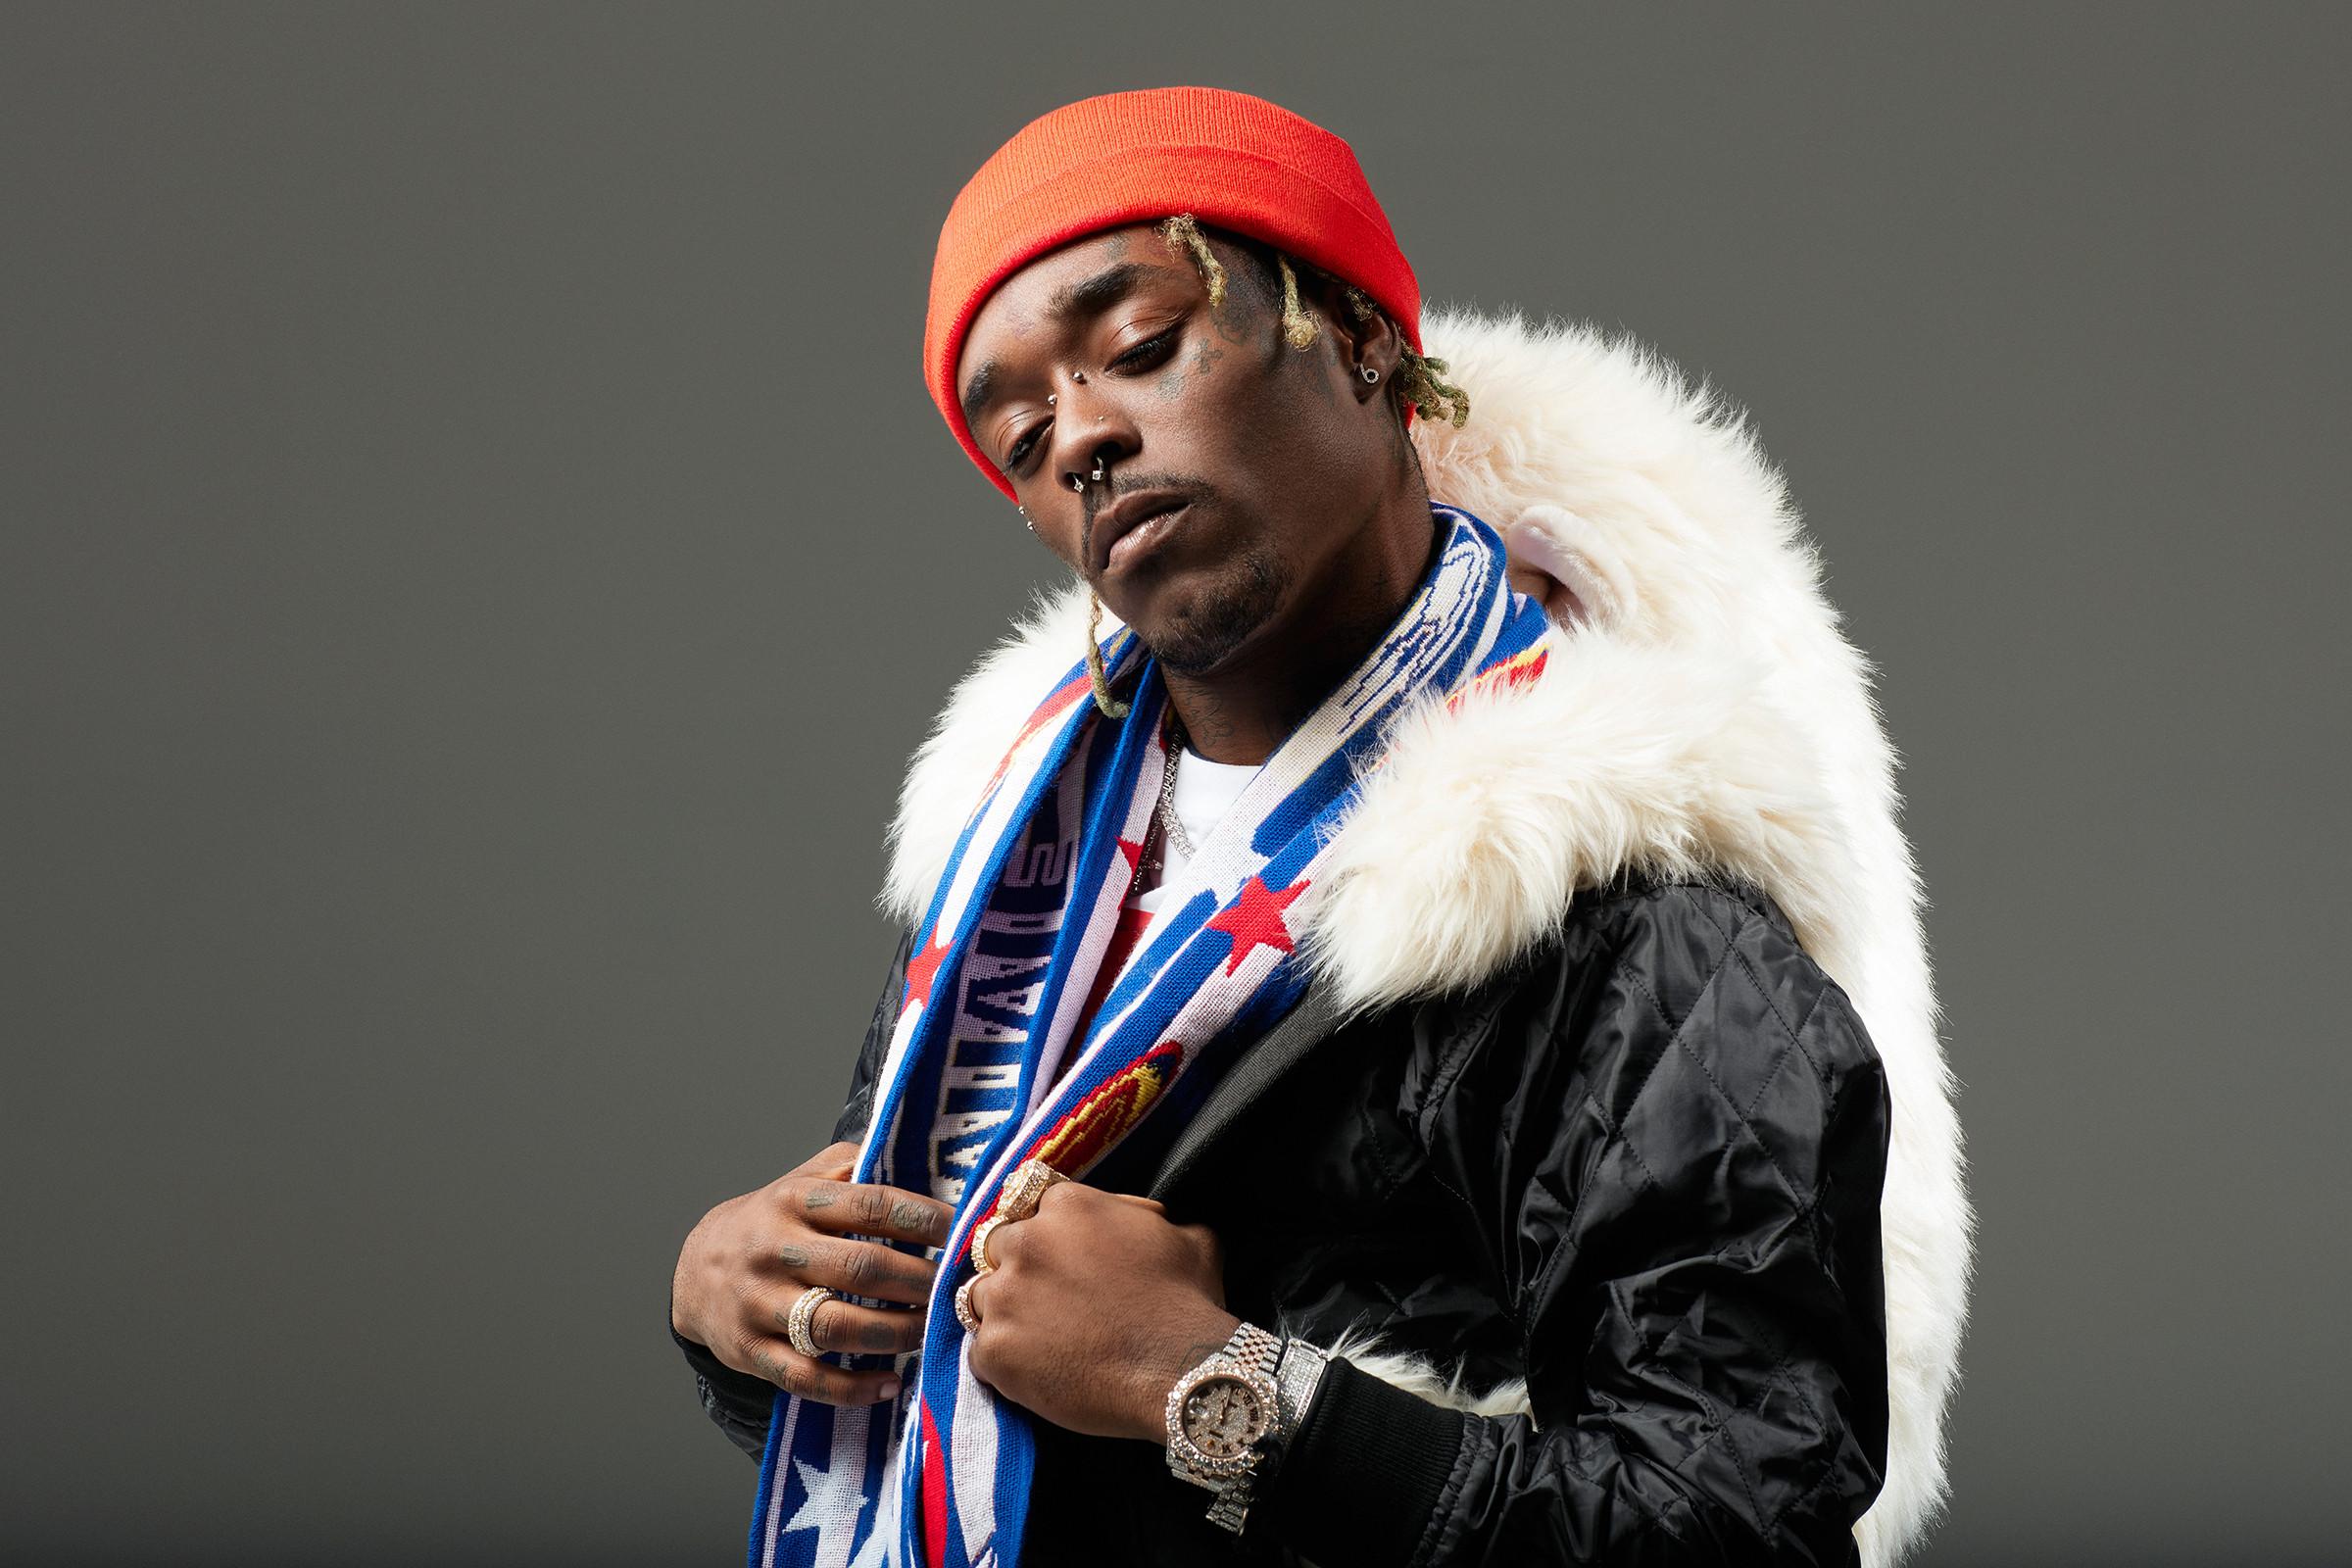 Lil Uzi Vert Drops Two Songs About Racks and Hitting it From